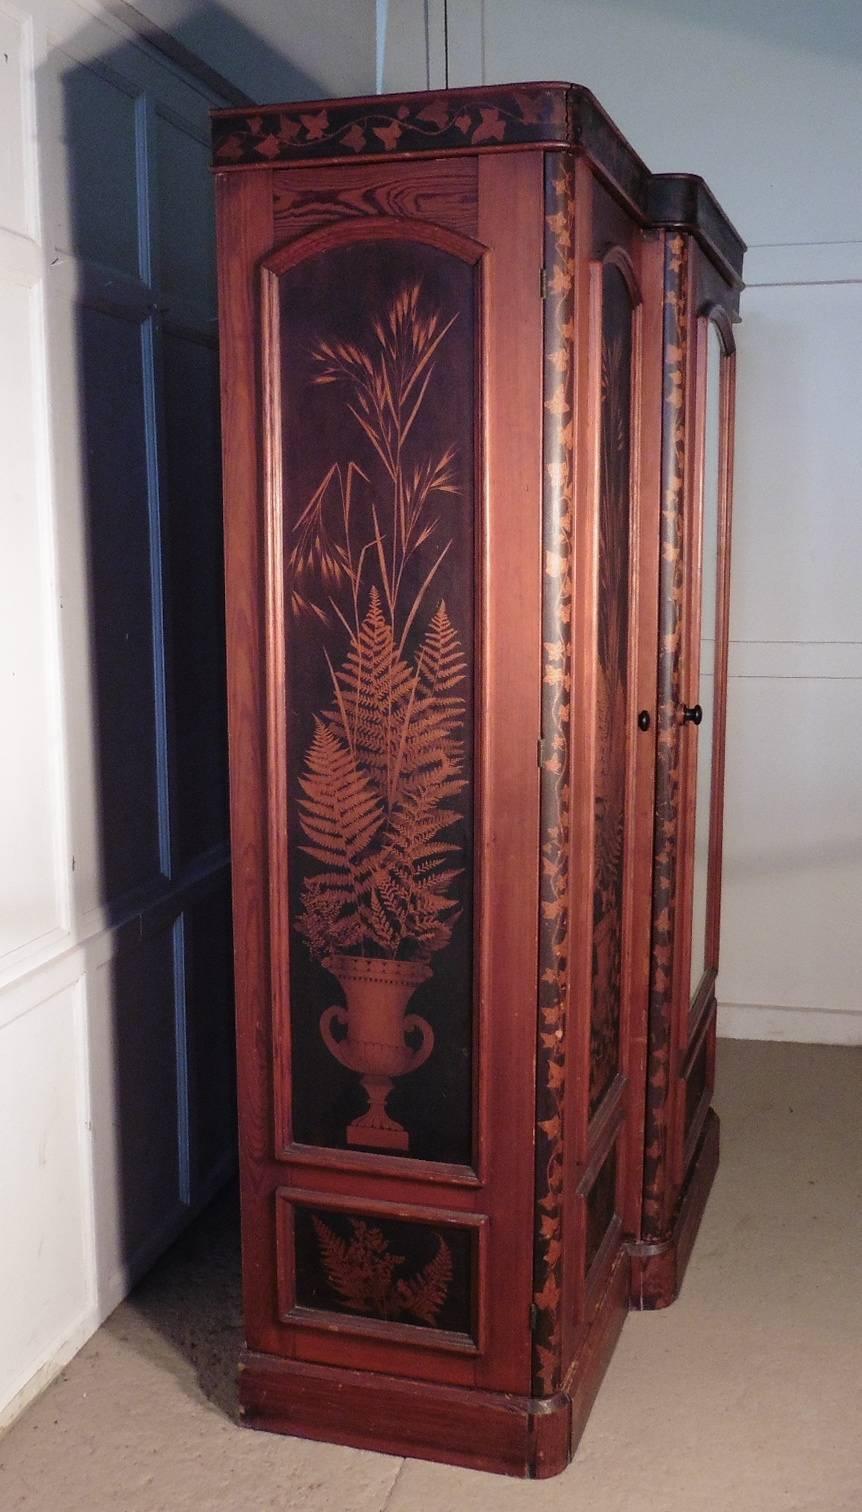 English Victorian Painted Pine Arts & Crafts Wardrobe Decorated with Ferns and Leaves